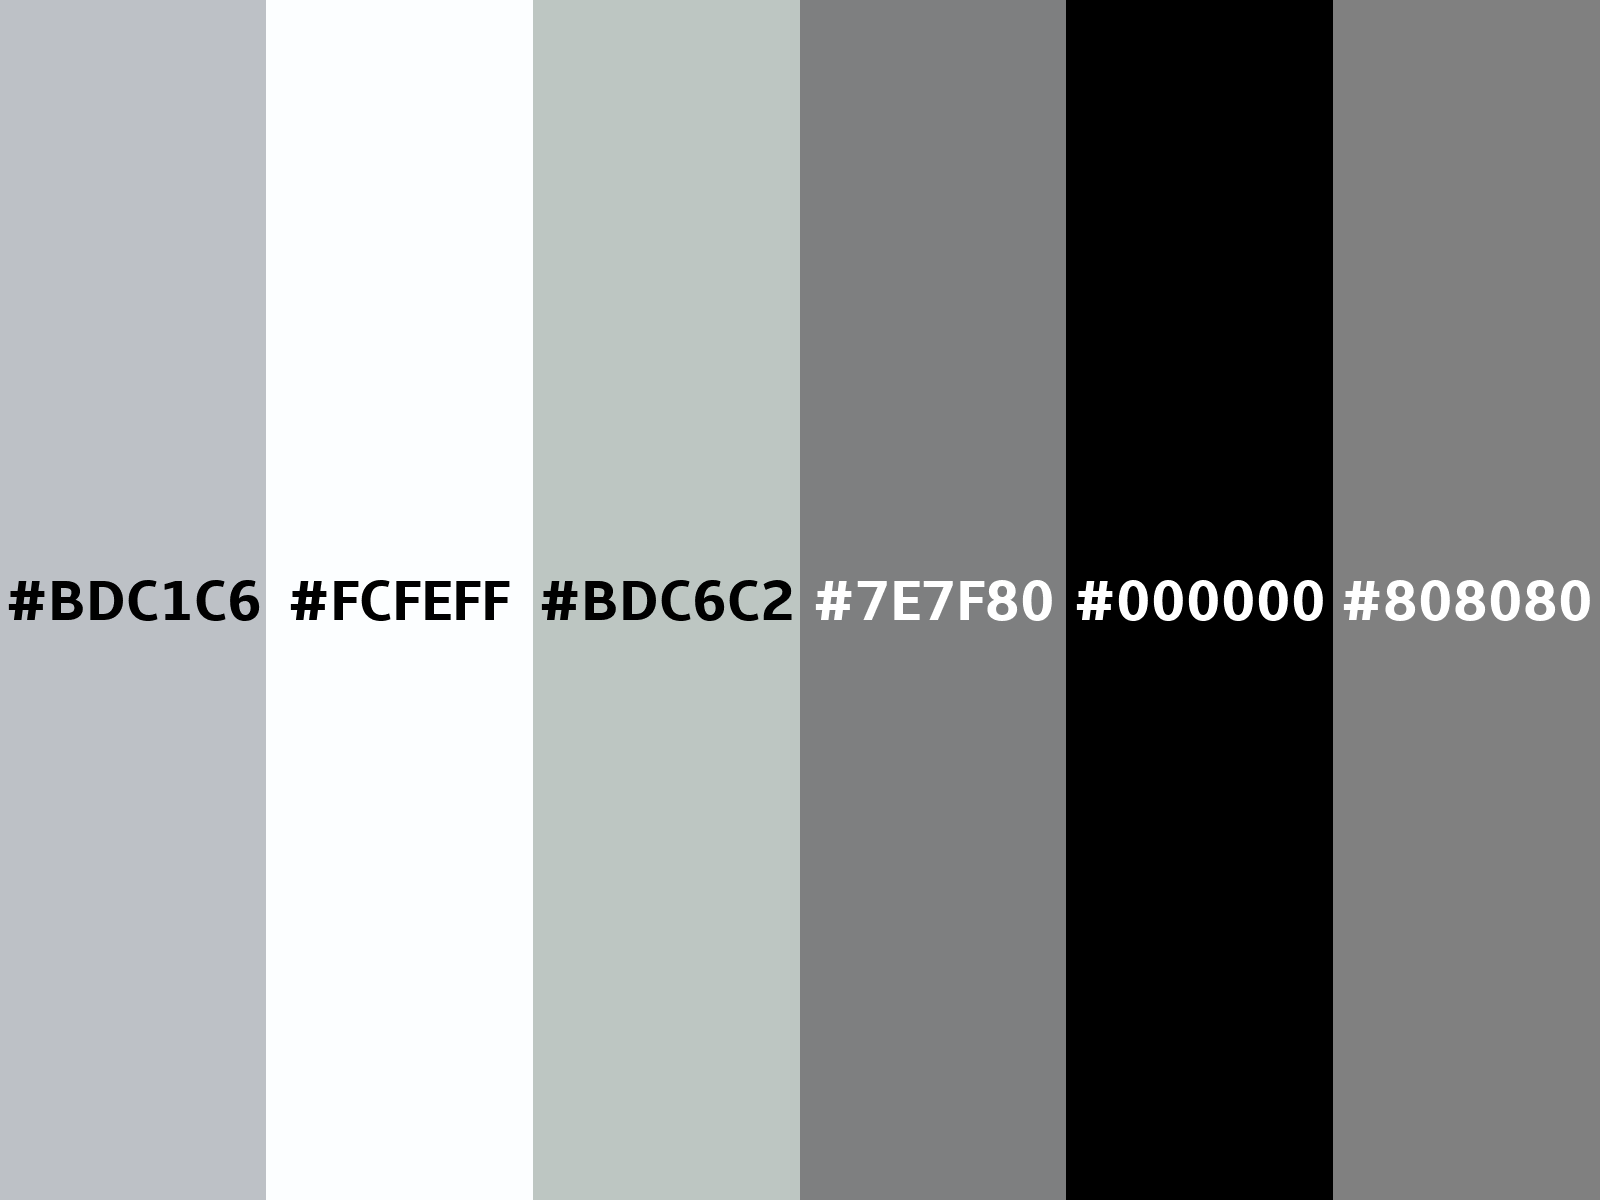 HEX color #CDCDCD, Color name: Very Light Grey, RGB(205,205,205), Windows:  13487565. - HTML CSS Color